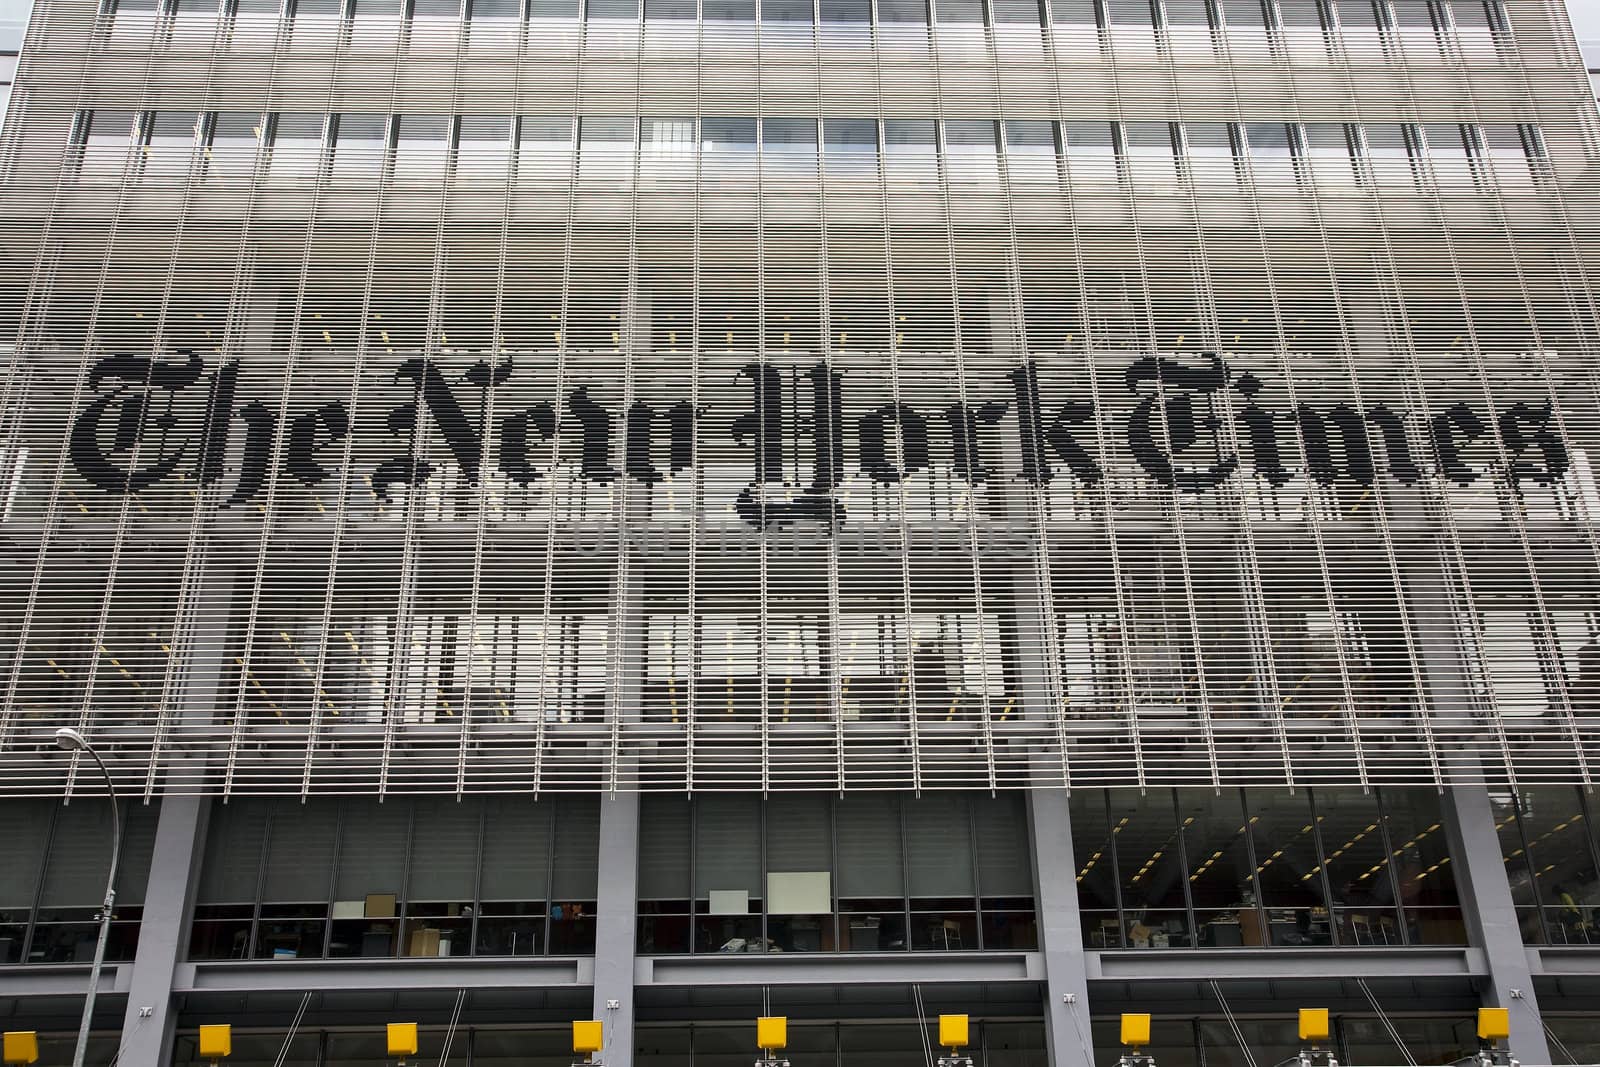 The New York Times offices near the Port Authority in Manhattan, New York.